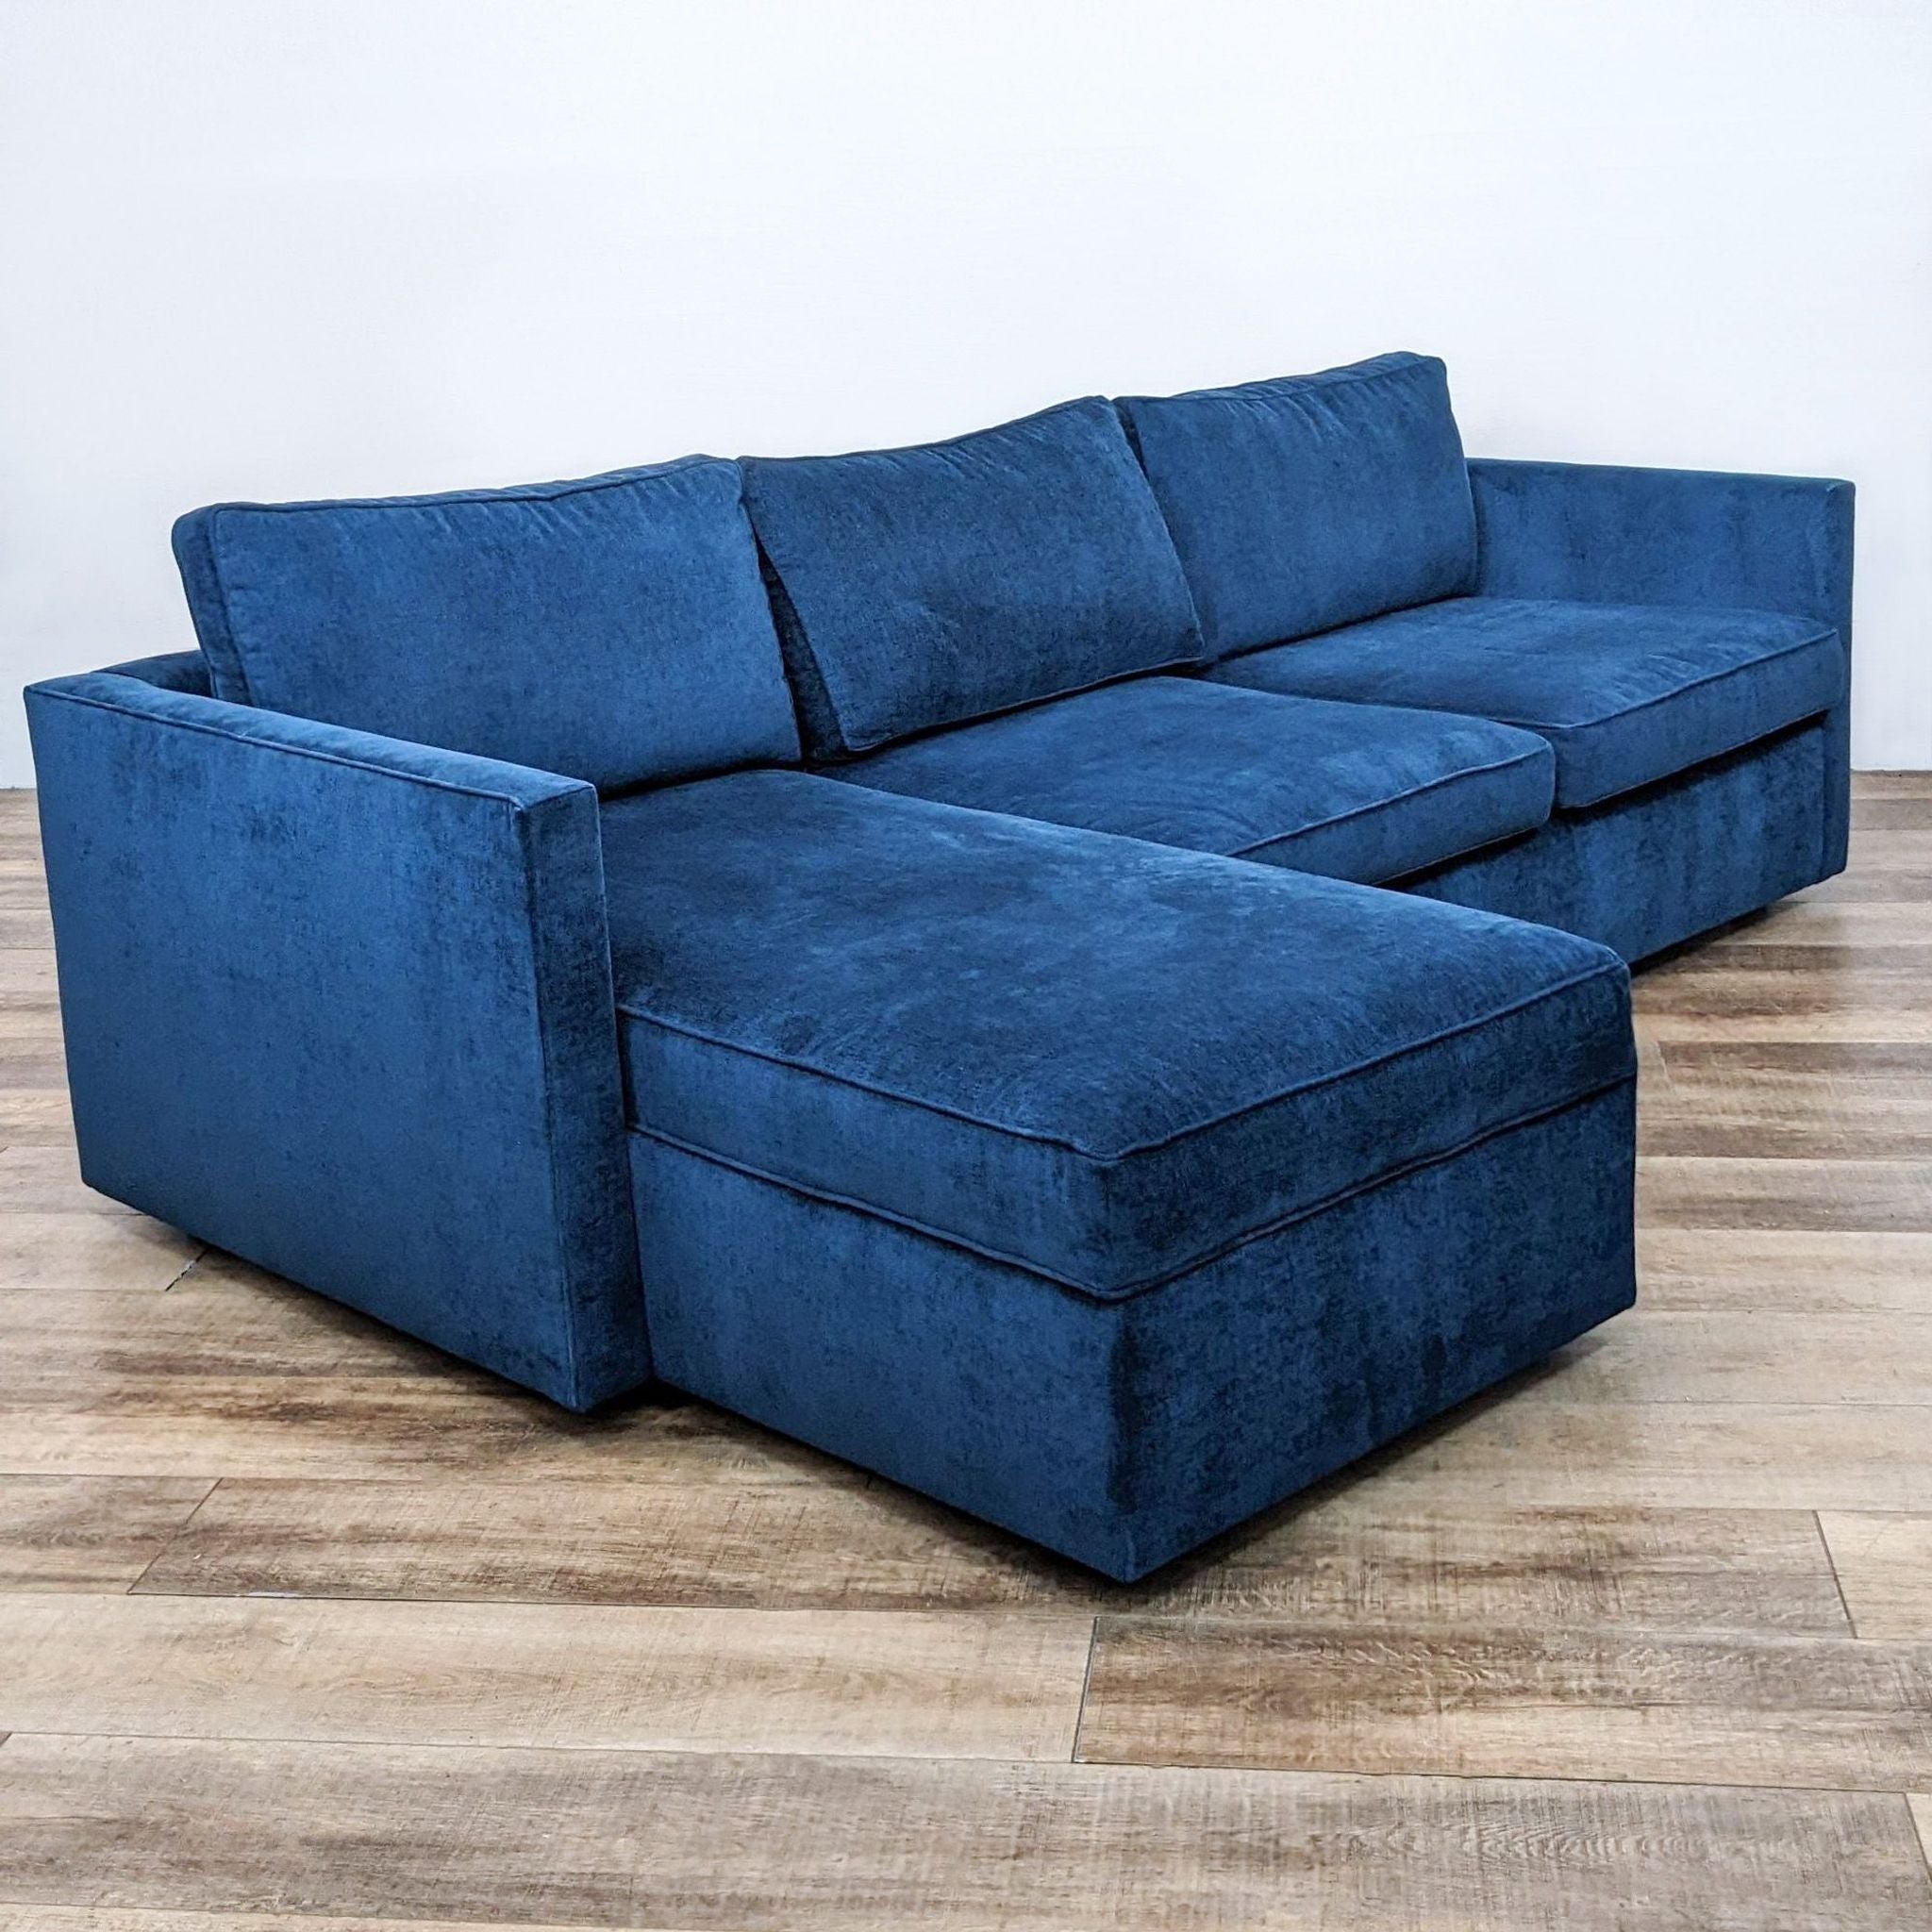 Alt text 2: West Elm sectional in distressed ink blue velvet, showcasing a chaise lounge and streamlined design with modest armrests, presented on a plank-style floor.